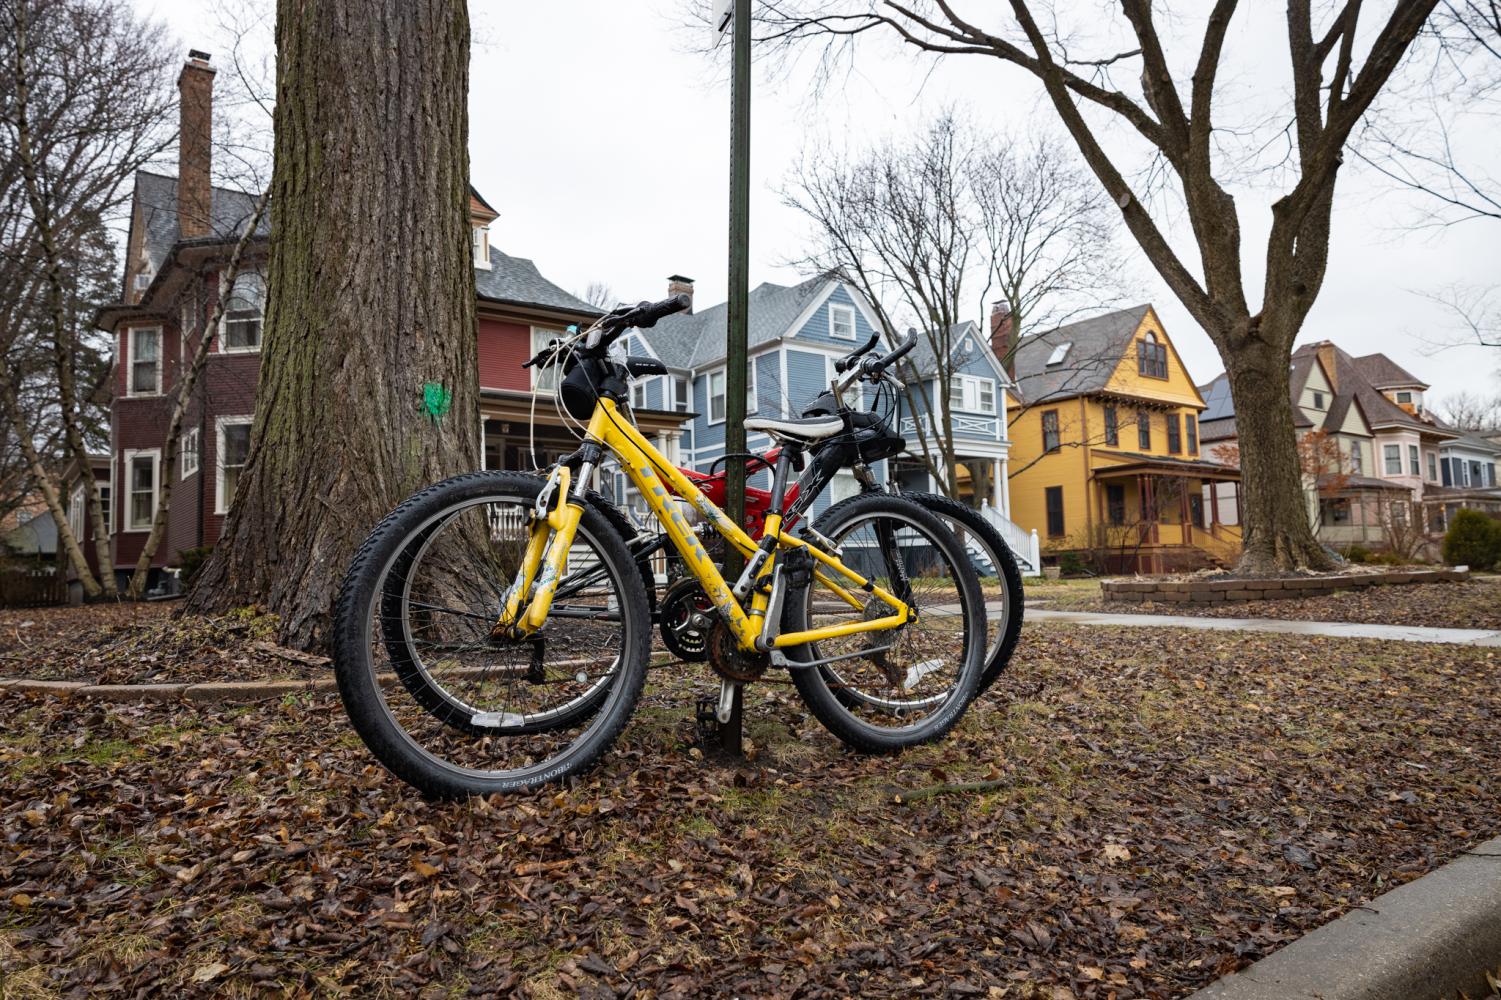 Yellow+bikes+sit+in+front+of+colorful+houses.